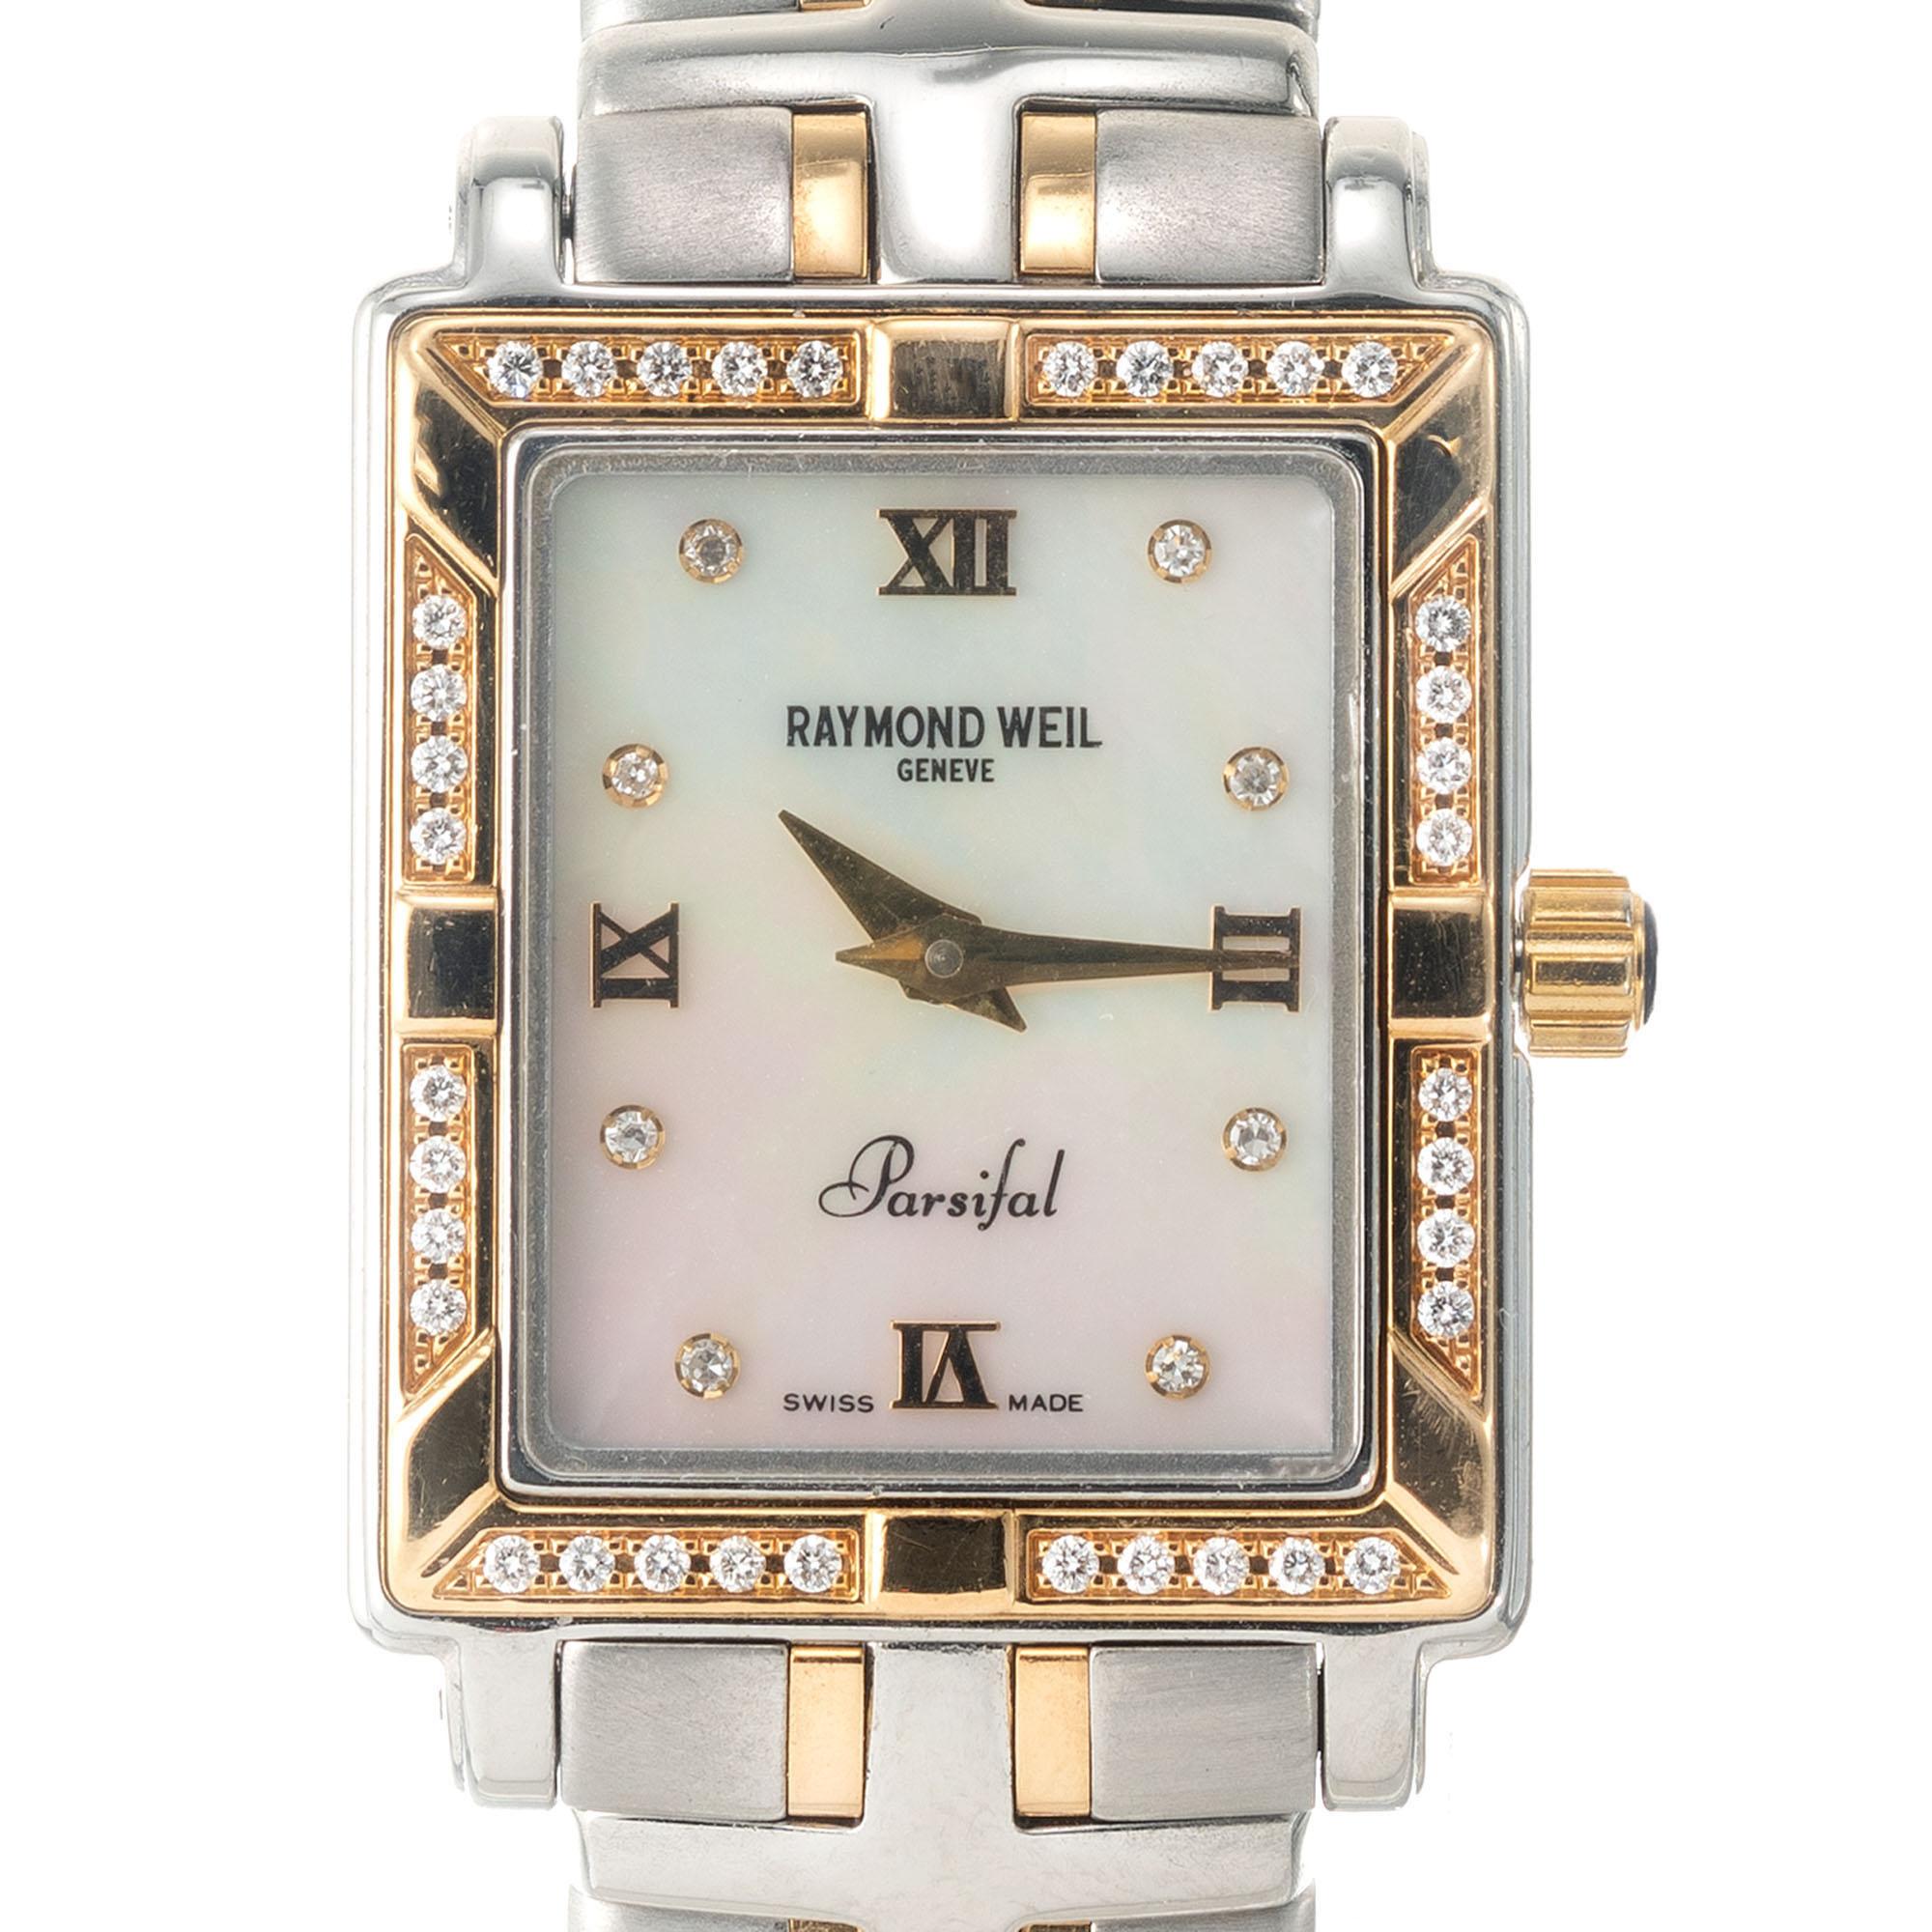 Raymond Weil Parsifal ladies two-tone gold wristwatch with diamond bezel and mother of pearl dial. 6.5 inches

44 round diamonds, VS G-H approx. .20cts 
Two tone gold
Length: 31.43mm 
Width: 22.07mm
Band width at case: 14mm
Case thickness: